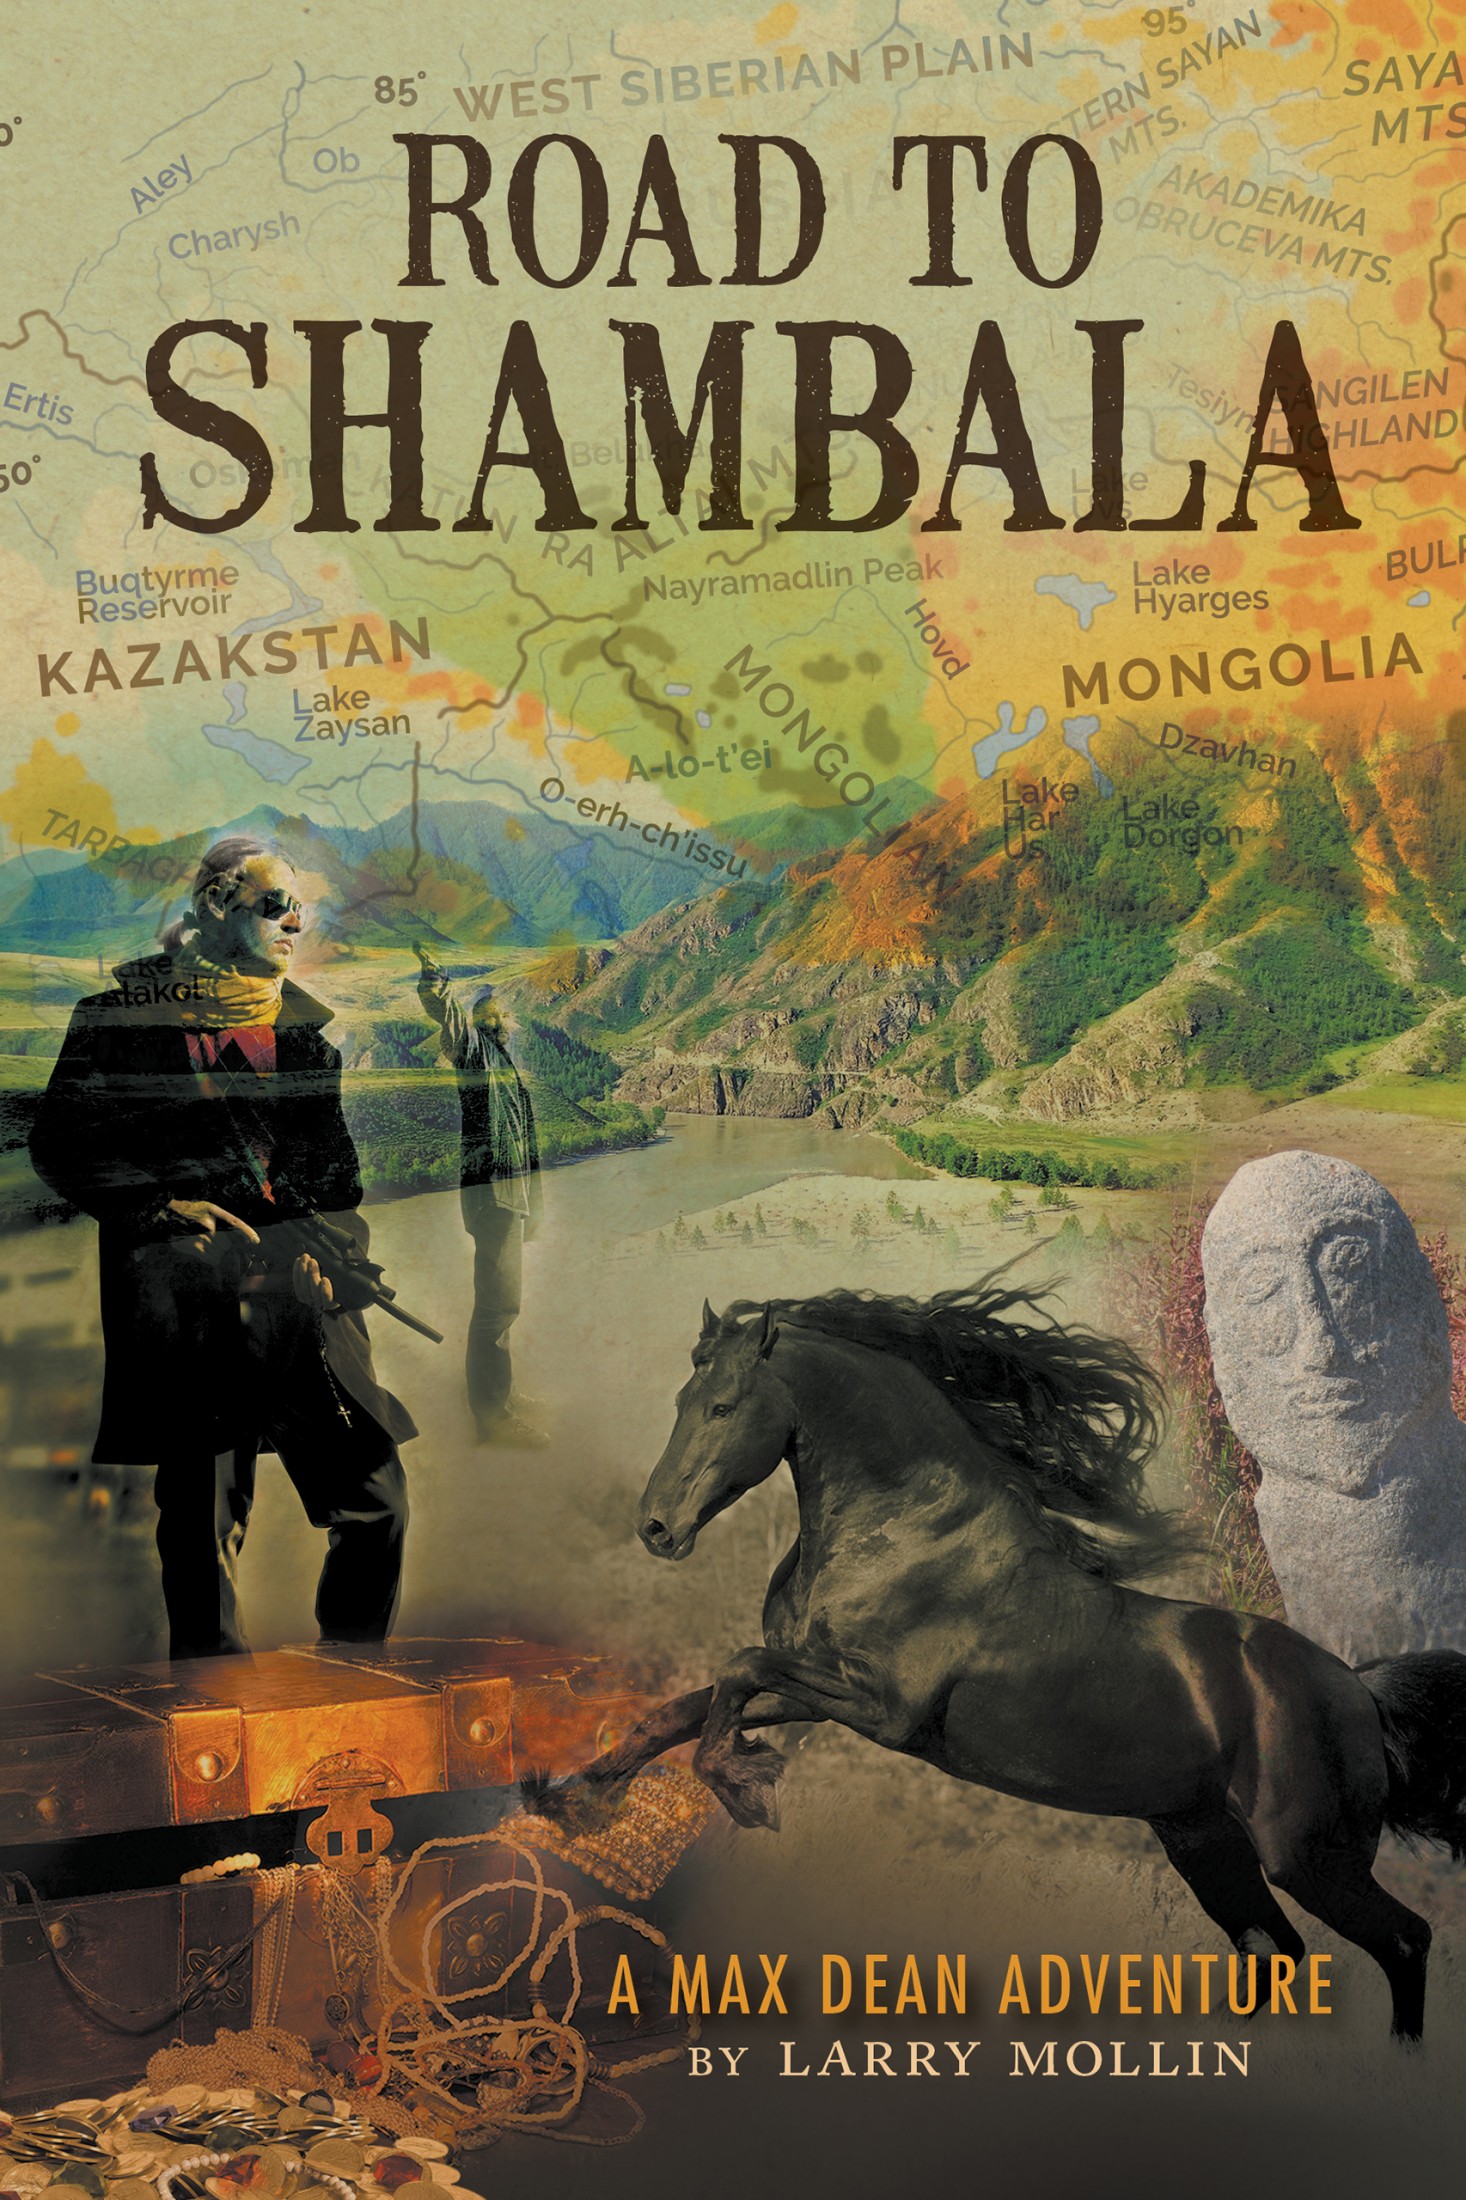 New novel "Road to Shambala" by Larry Mollin is released, an adventure that follows the multi-talented Max Dean in pursuit of his reckless mother-in-law toward a fabled valley and a mythical treasure